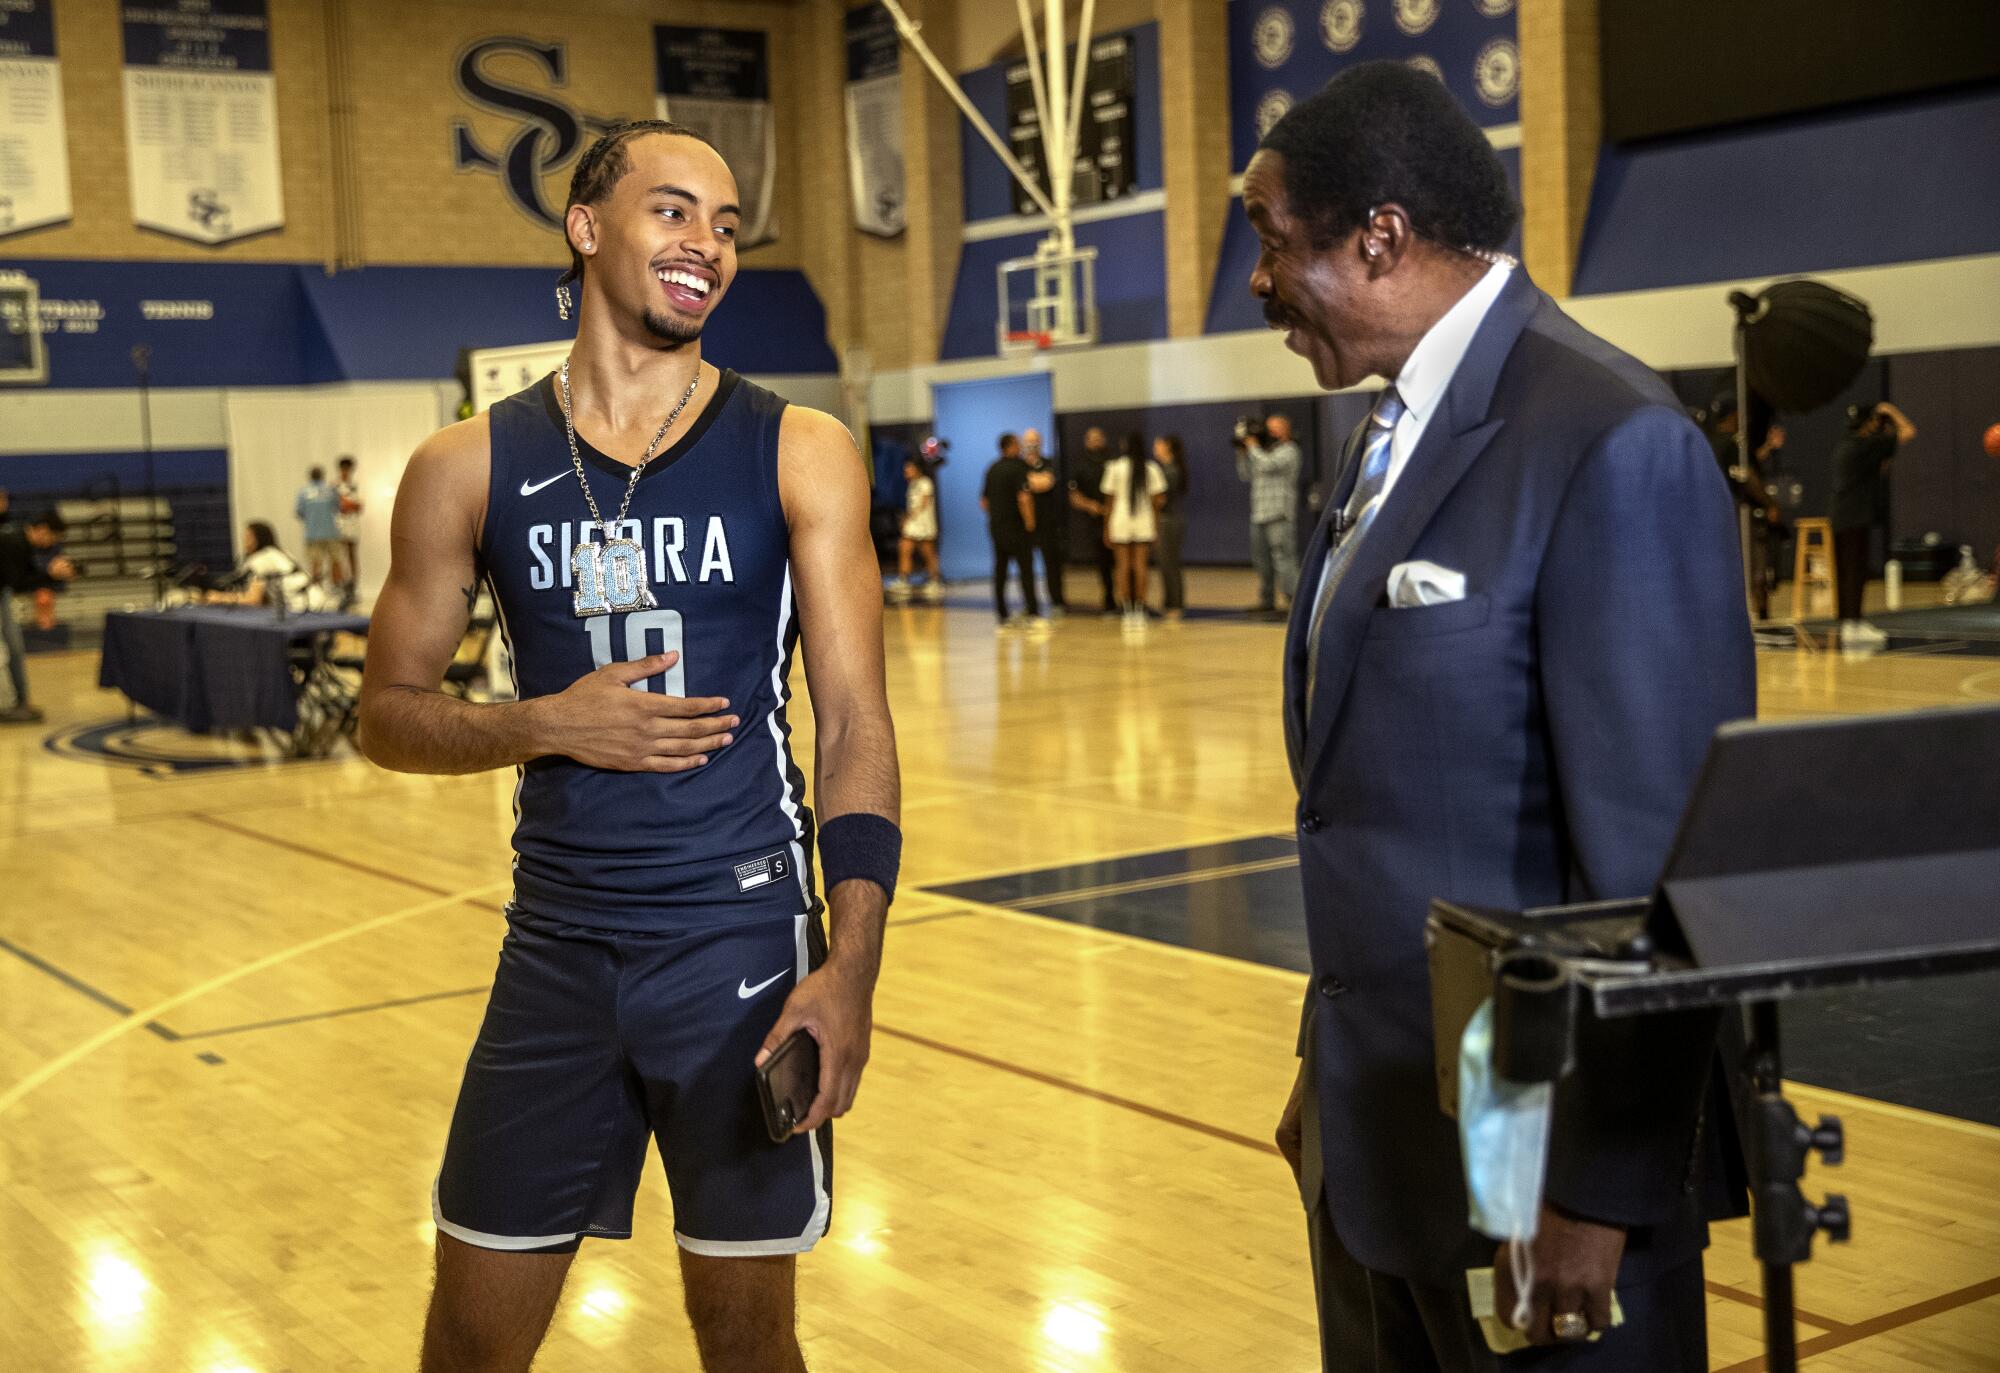 Sierra Canyon forward Amari Bailey shares a light moment with Channel 2 sports anchor Jim Hill.